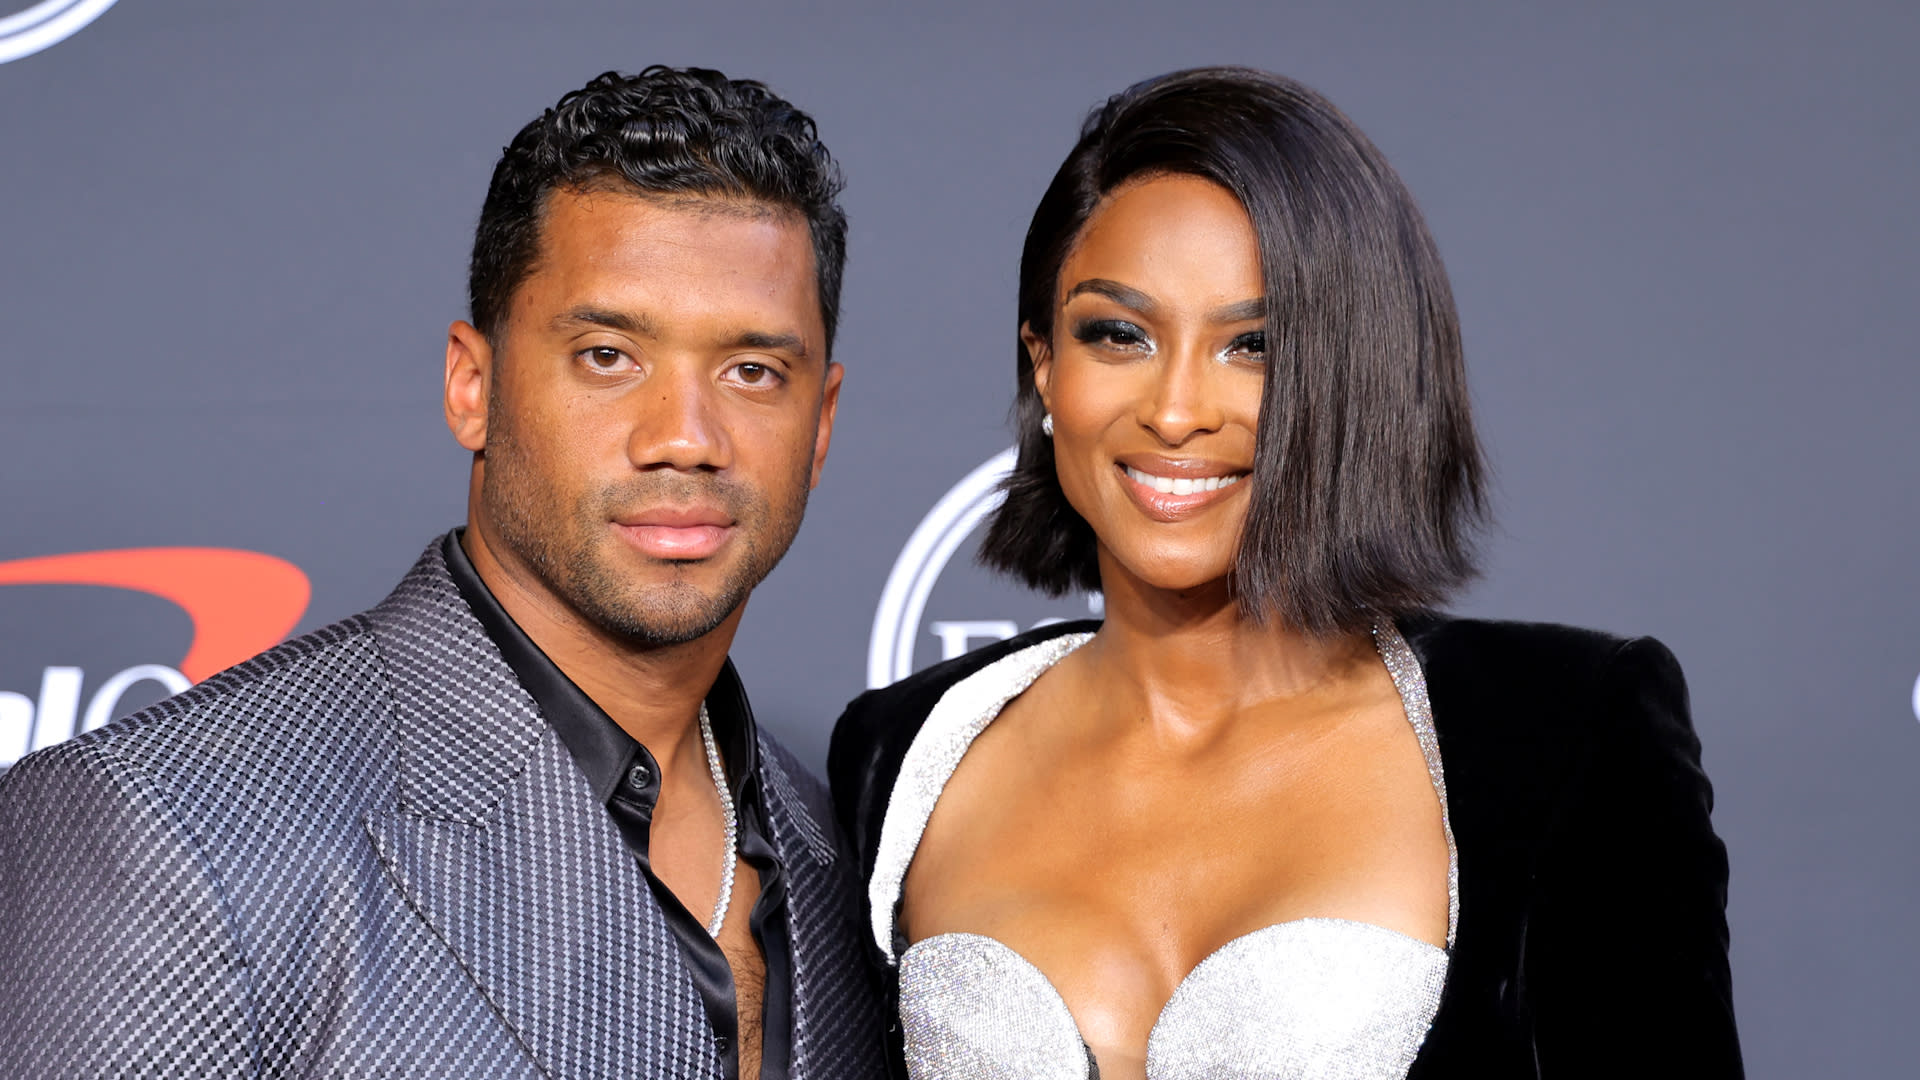 Russell Wilson shares photo of Ciara, new baby: What to know about